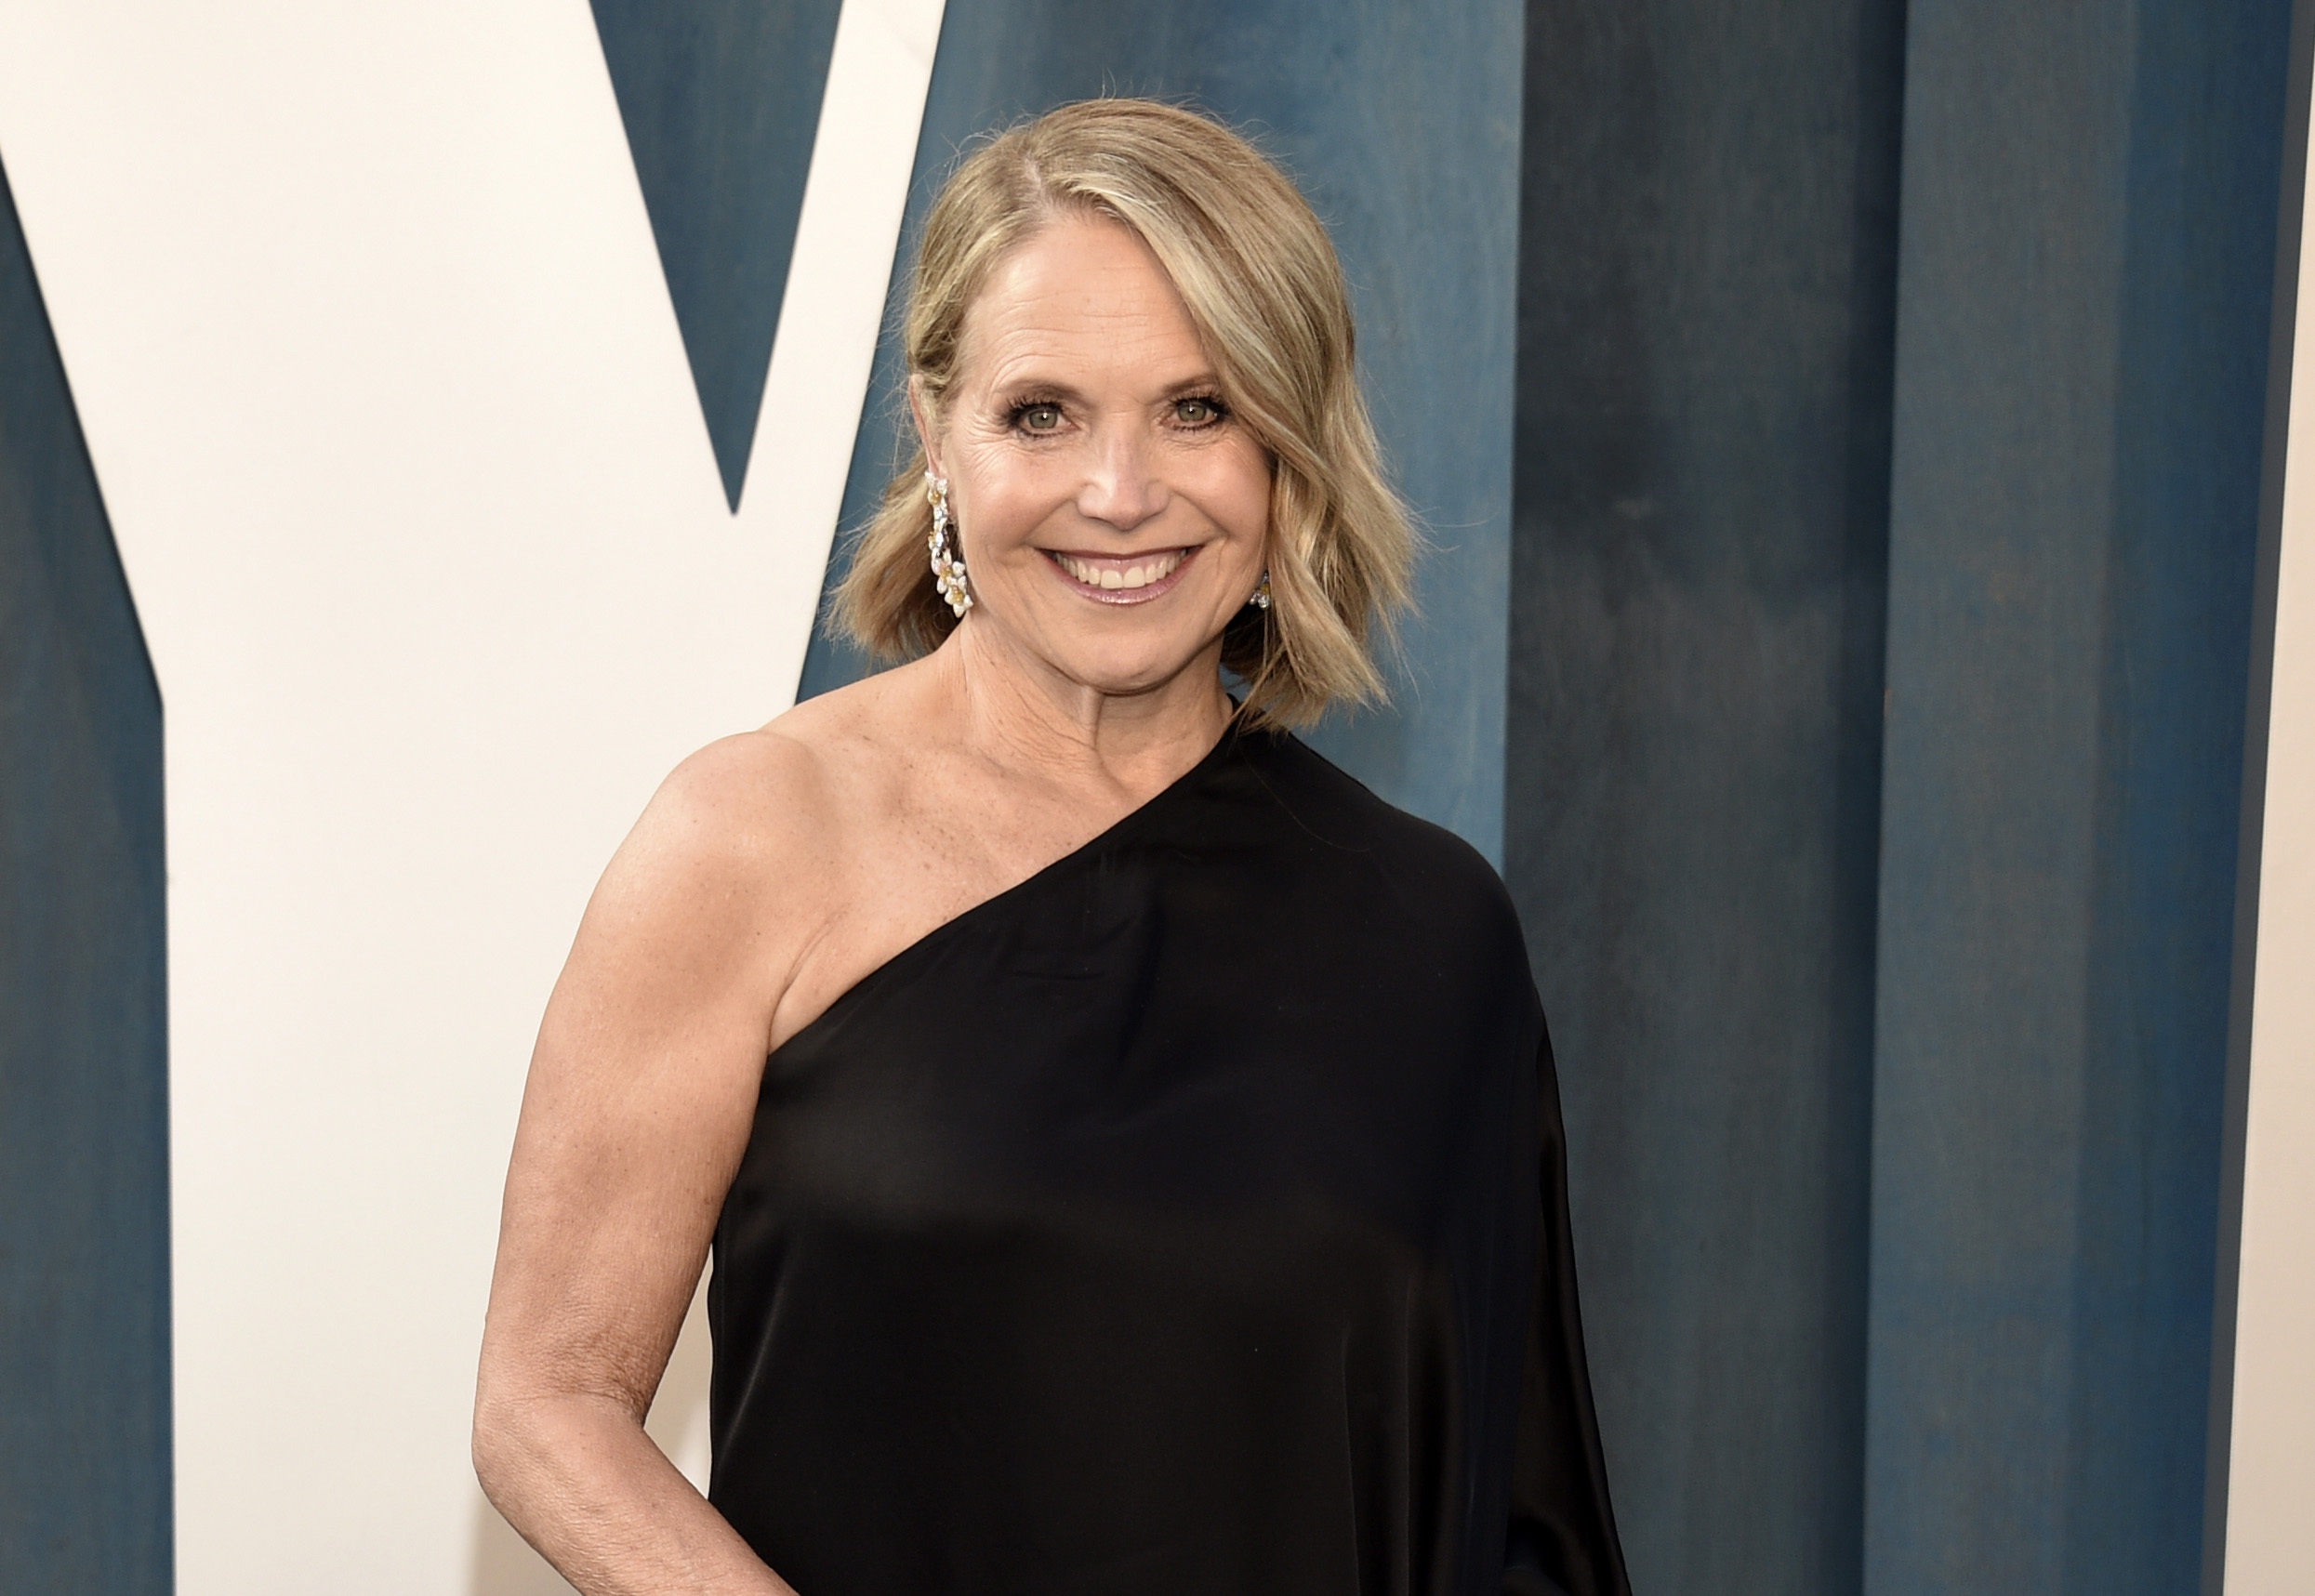 Katie Couric attends the Vanity Fair Oscar Party in Beverly Hills, California, on March 27.